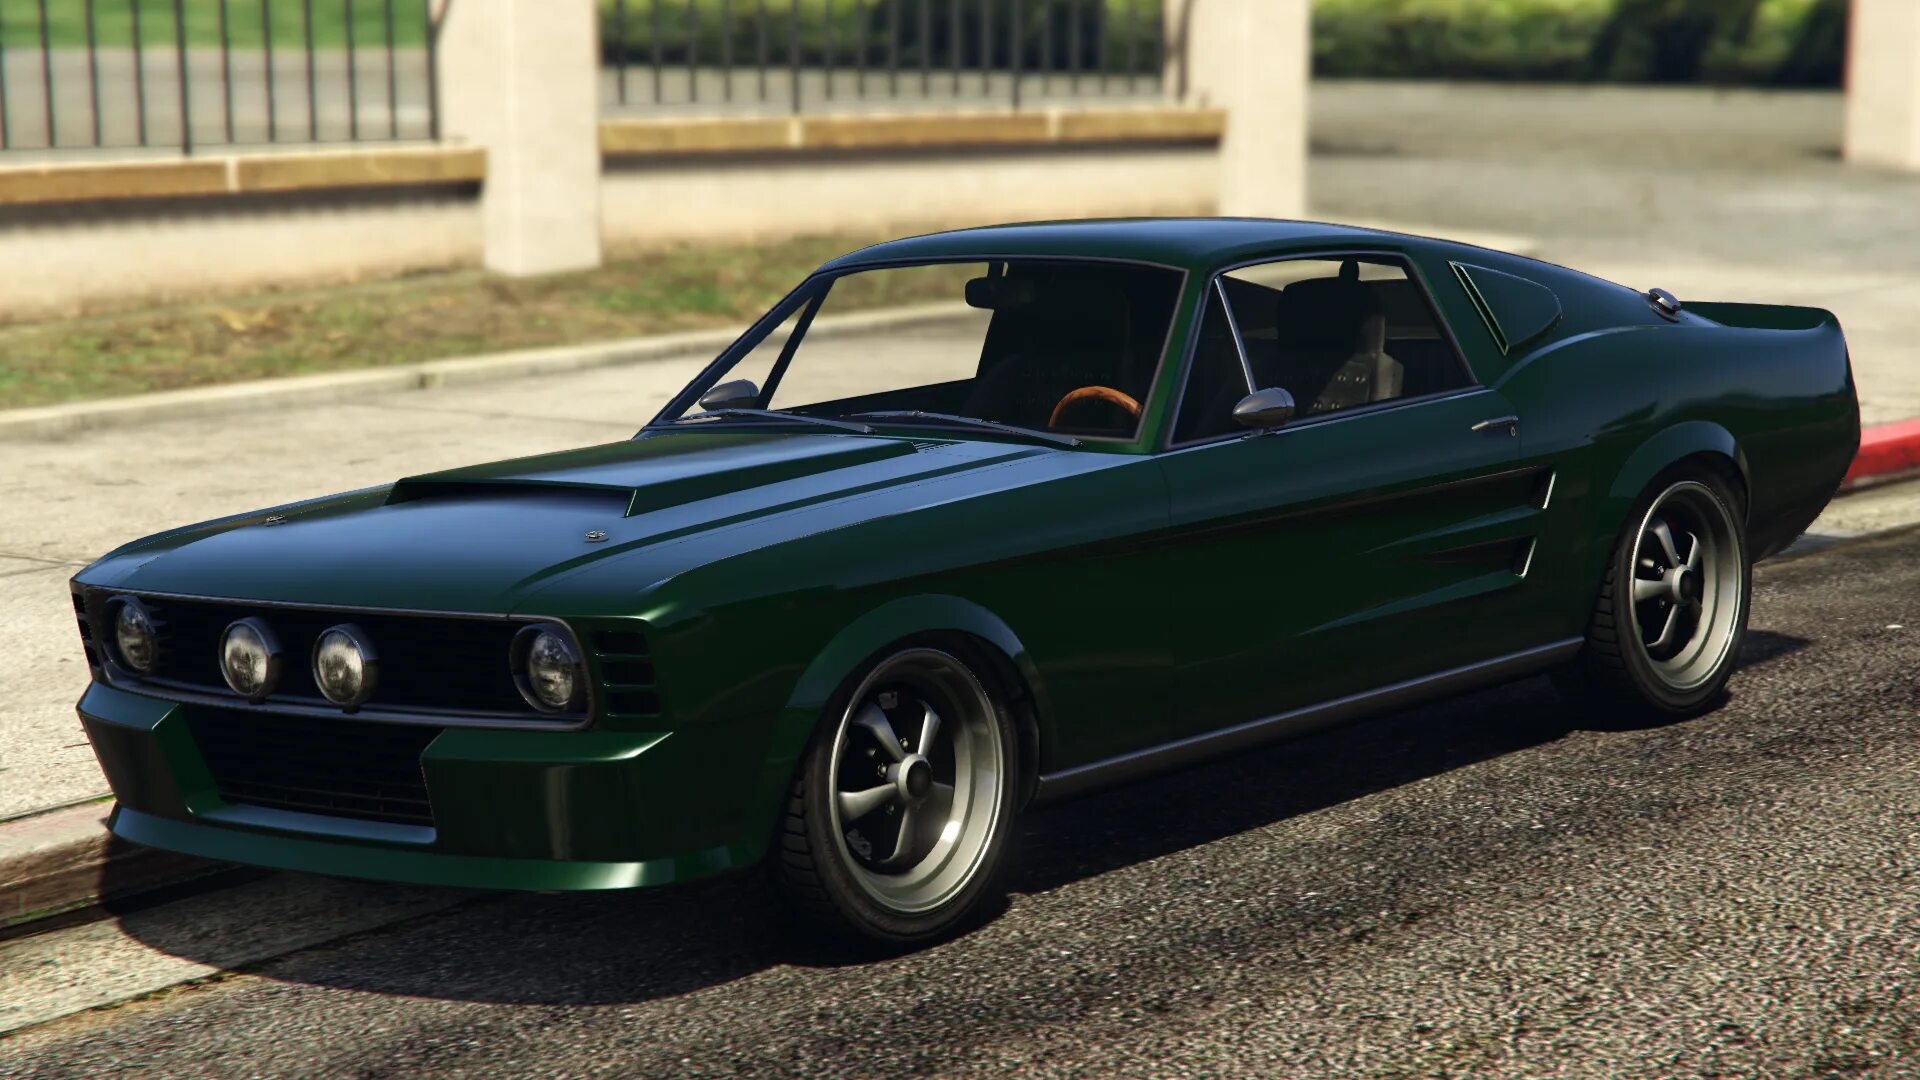 Ford Mustang gt500 ГТА 5. Форд Мустанг в ГТА 5. GTA 5 Mustang gt 500. Shelby gt500 ГТА 5. Мустанг в гта 5